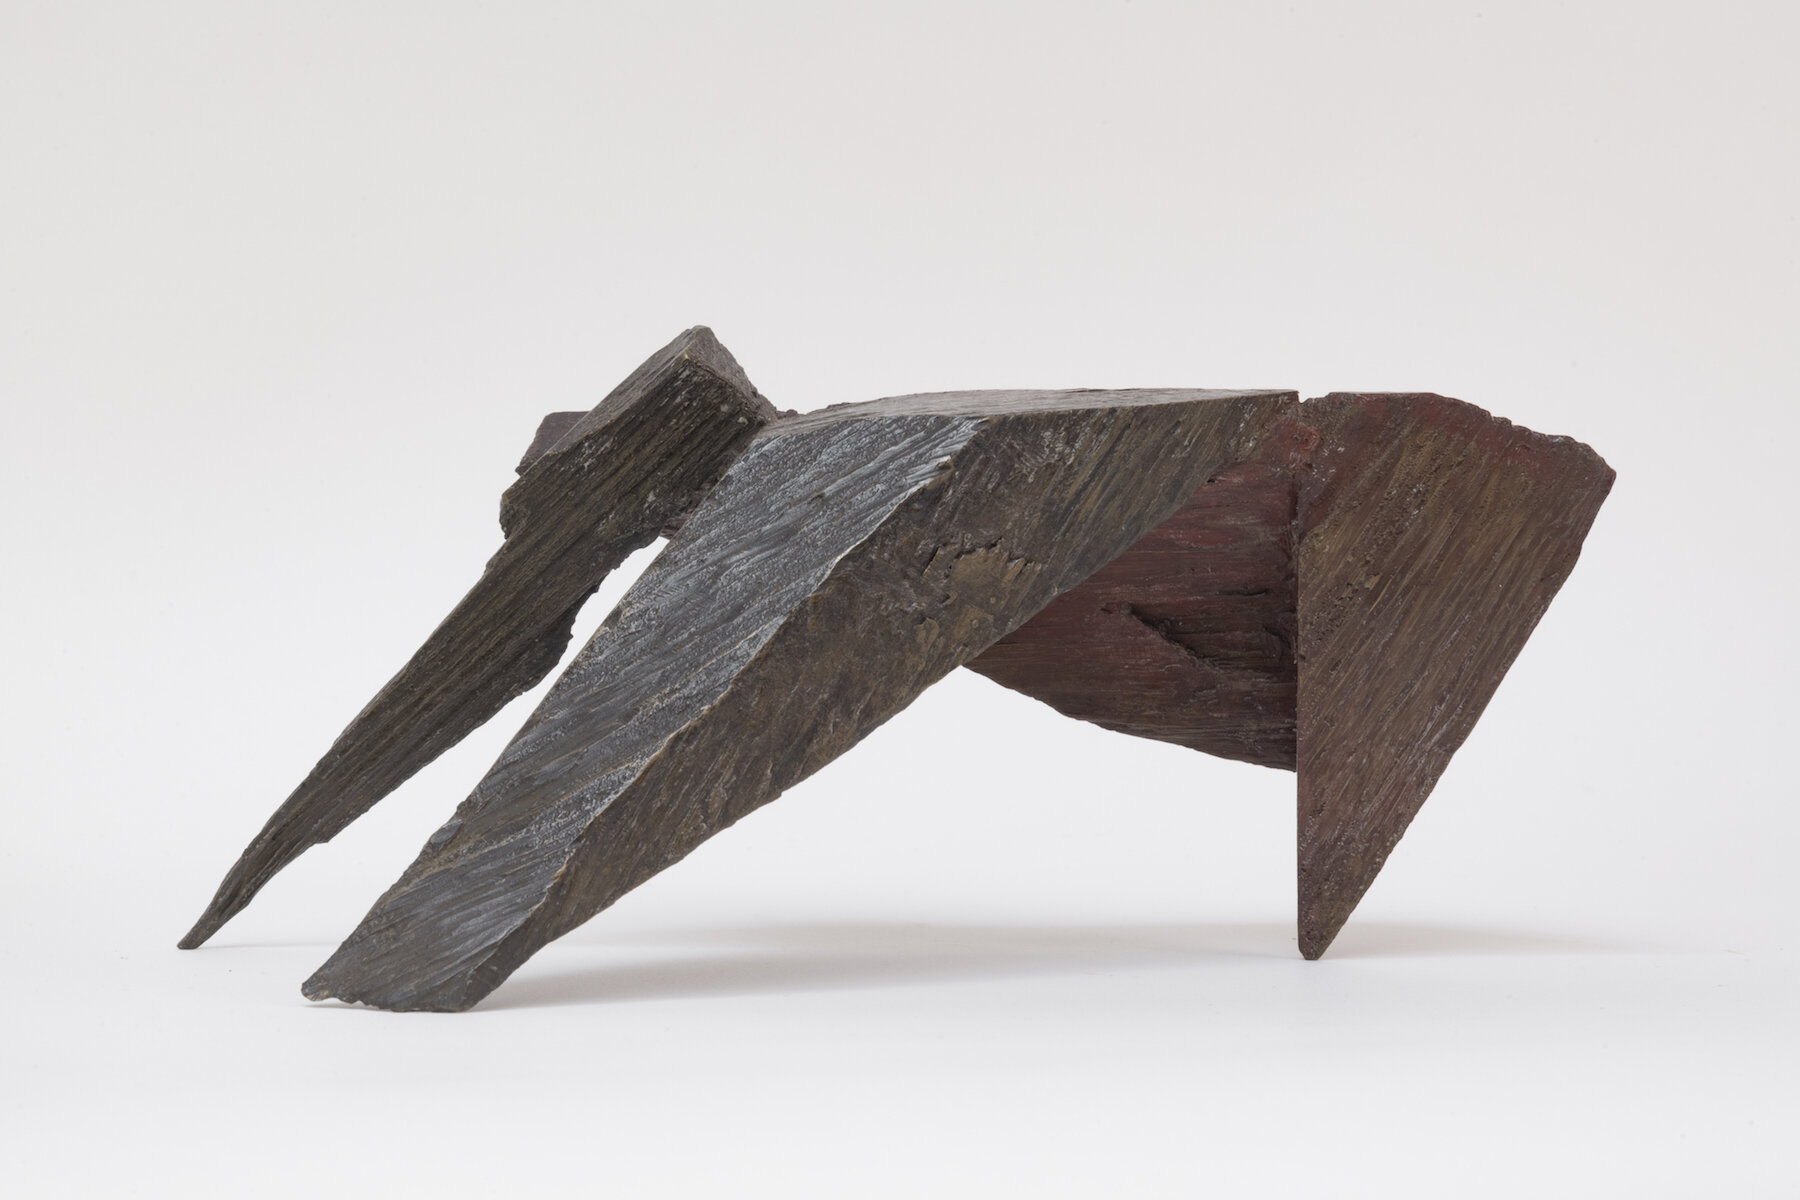   Ballygally , 2007, Unique cast bronze from wood, 4 x 5 x 9 in 